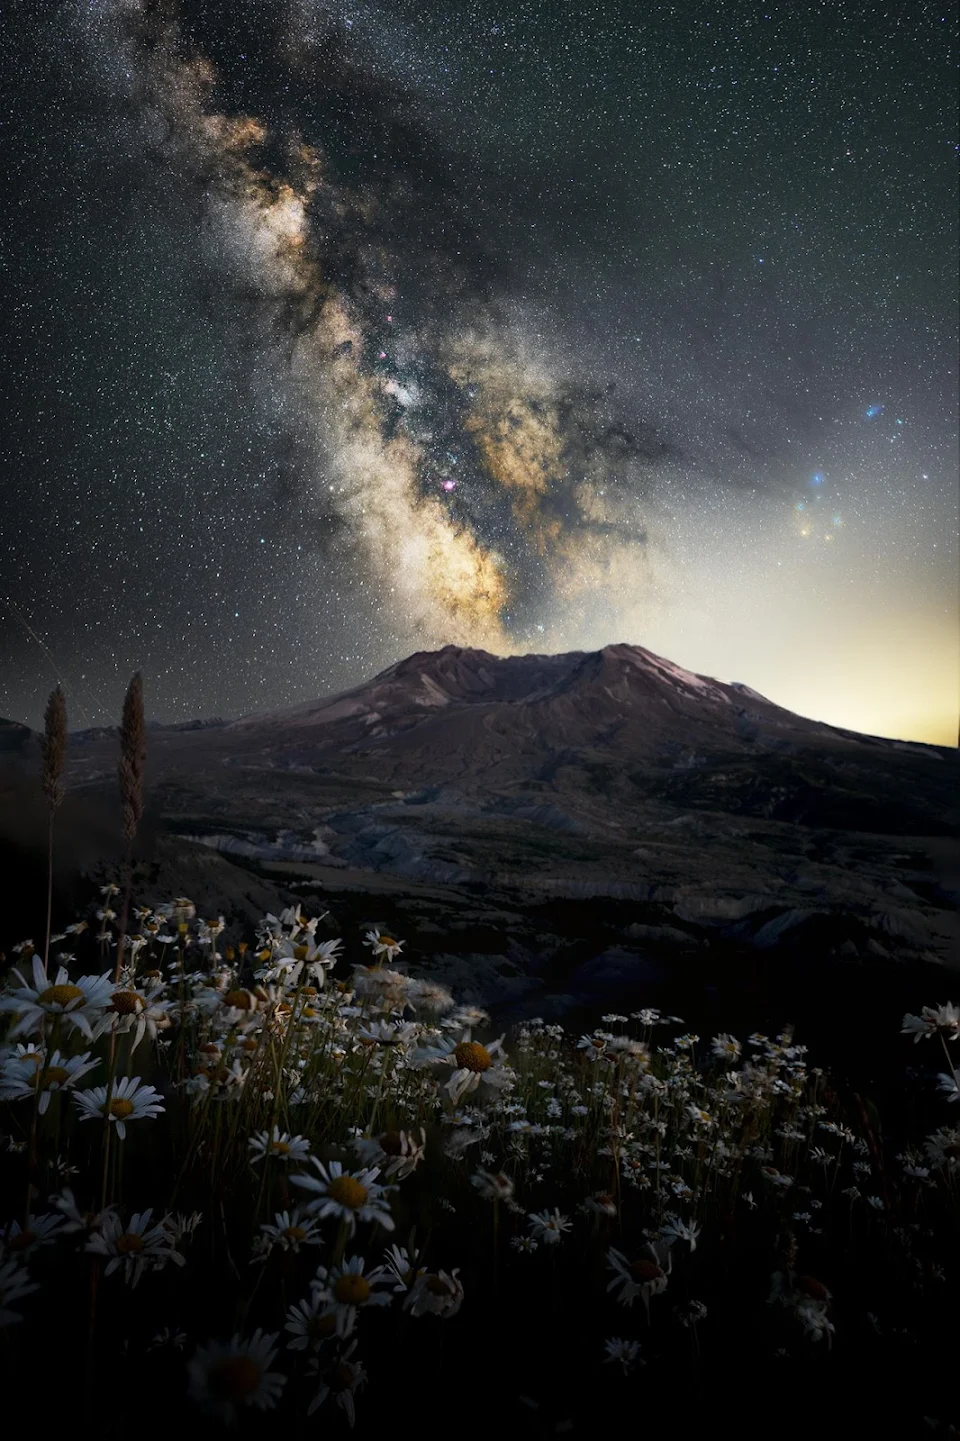 Wildflowers, a volcano, and the Milky Way.